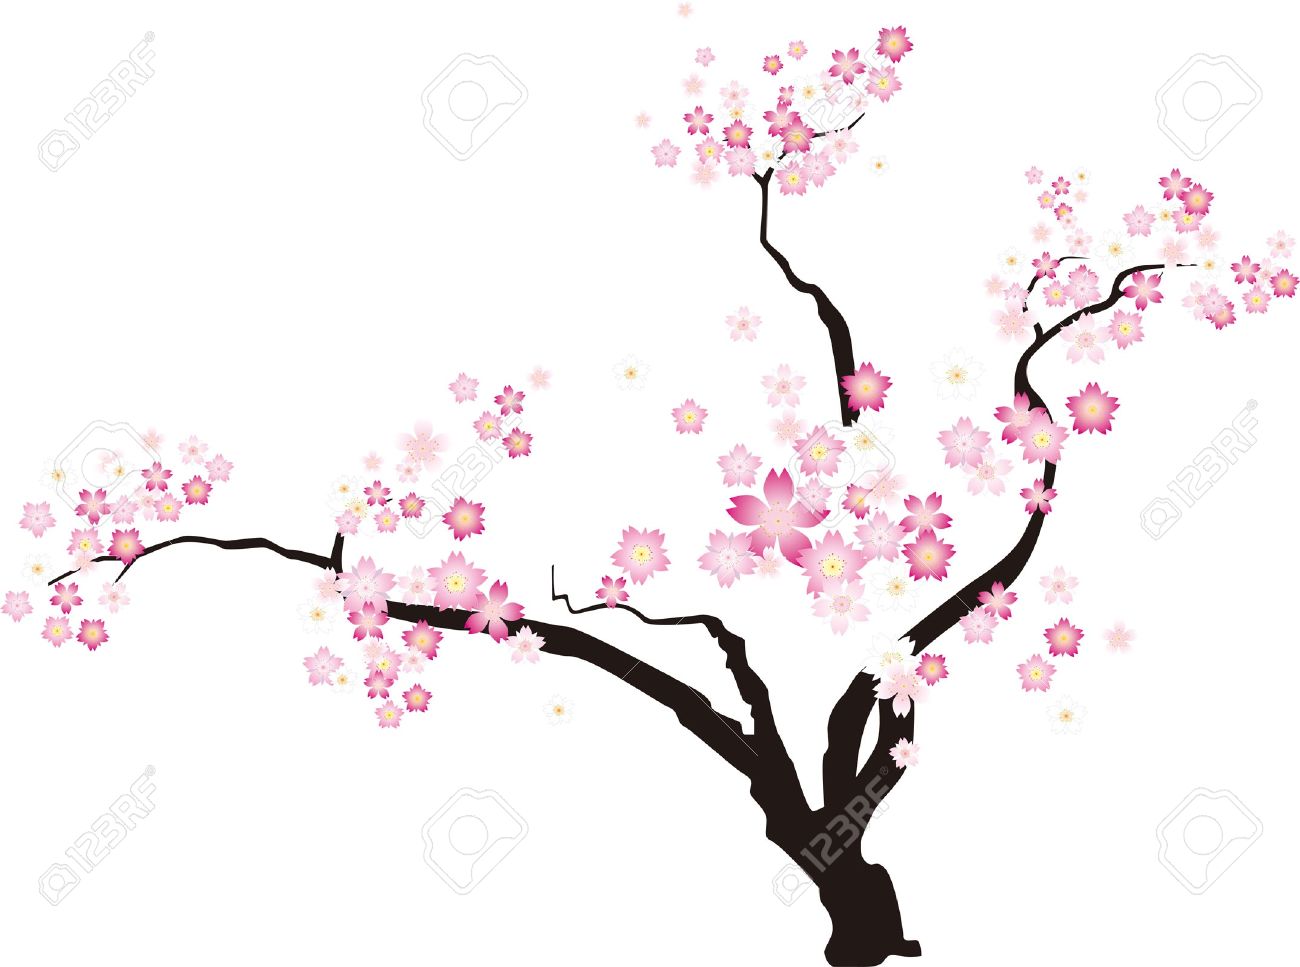 Ume Blossom clipart #6, Download drawings